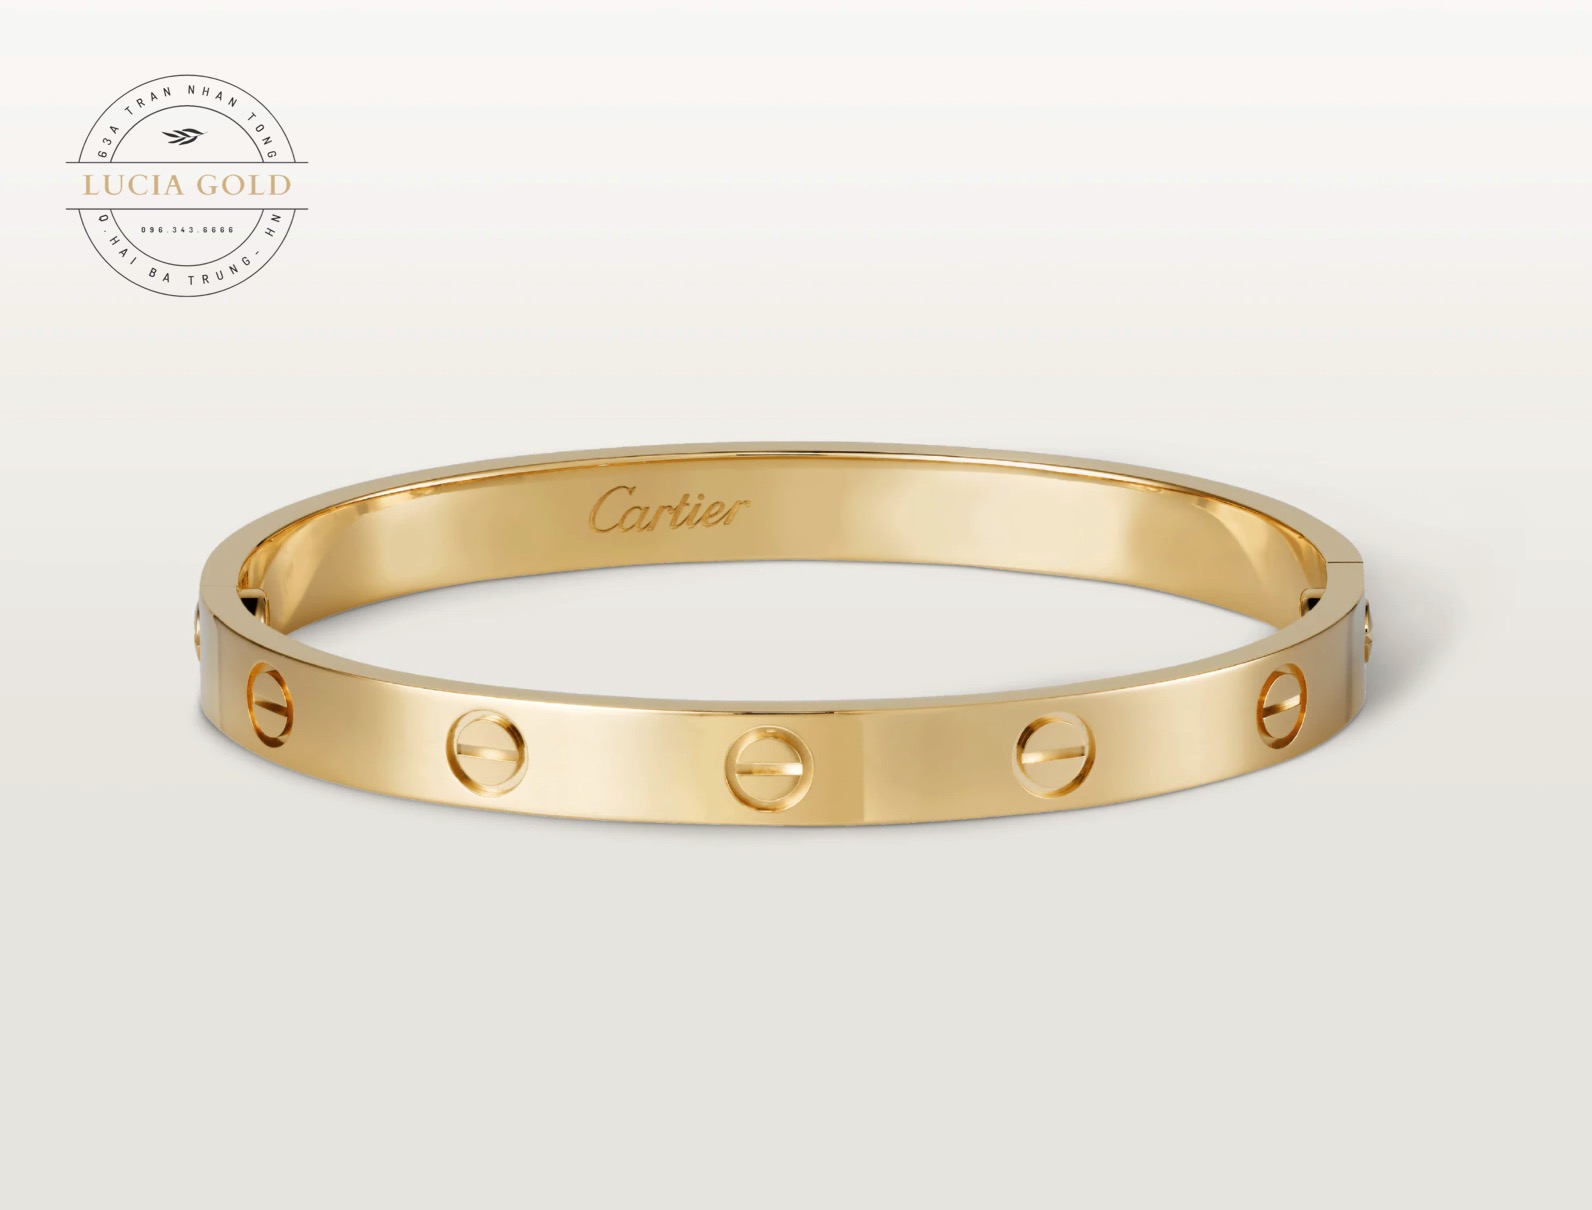 Cartier - LUCIA GOLD - LUXURY JEWELRY